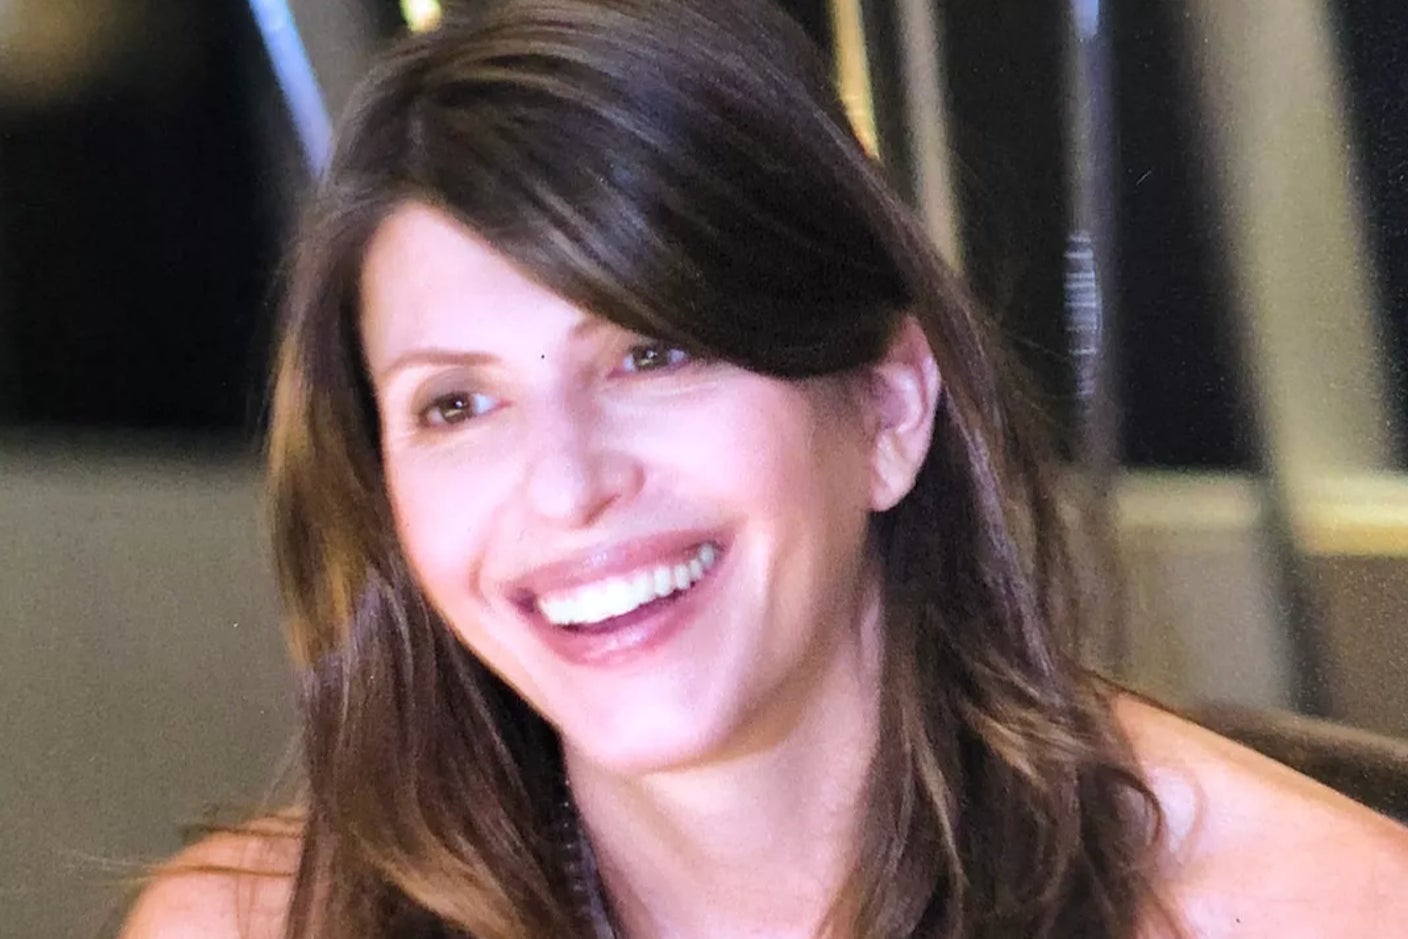 Jennifer Dulos has been missing since May 2019